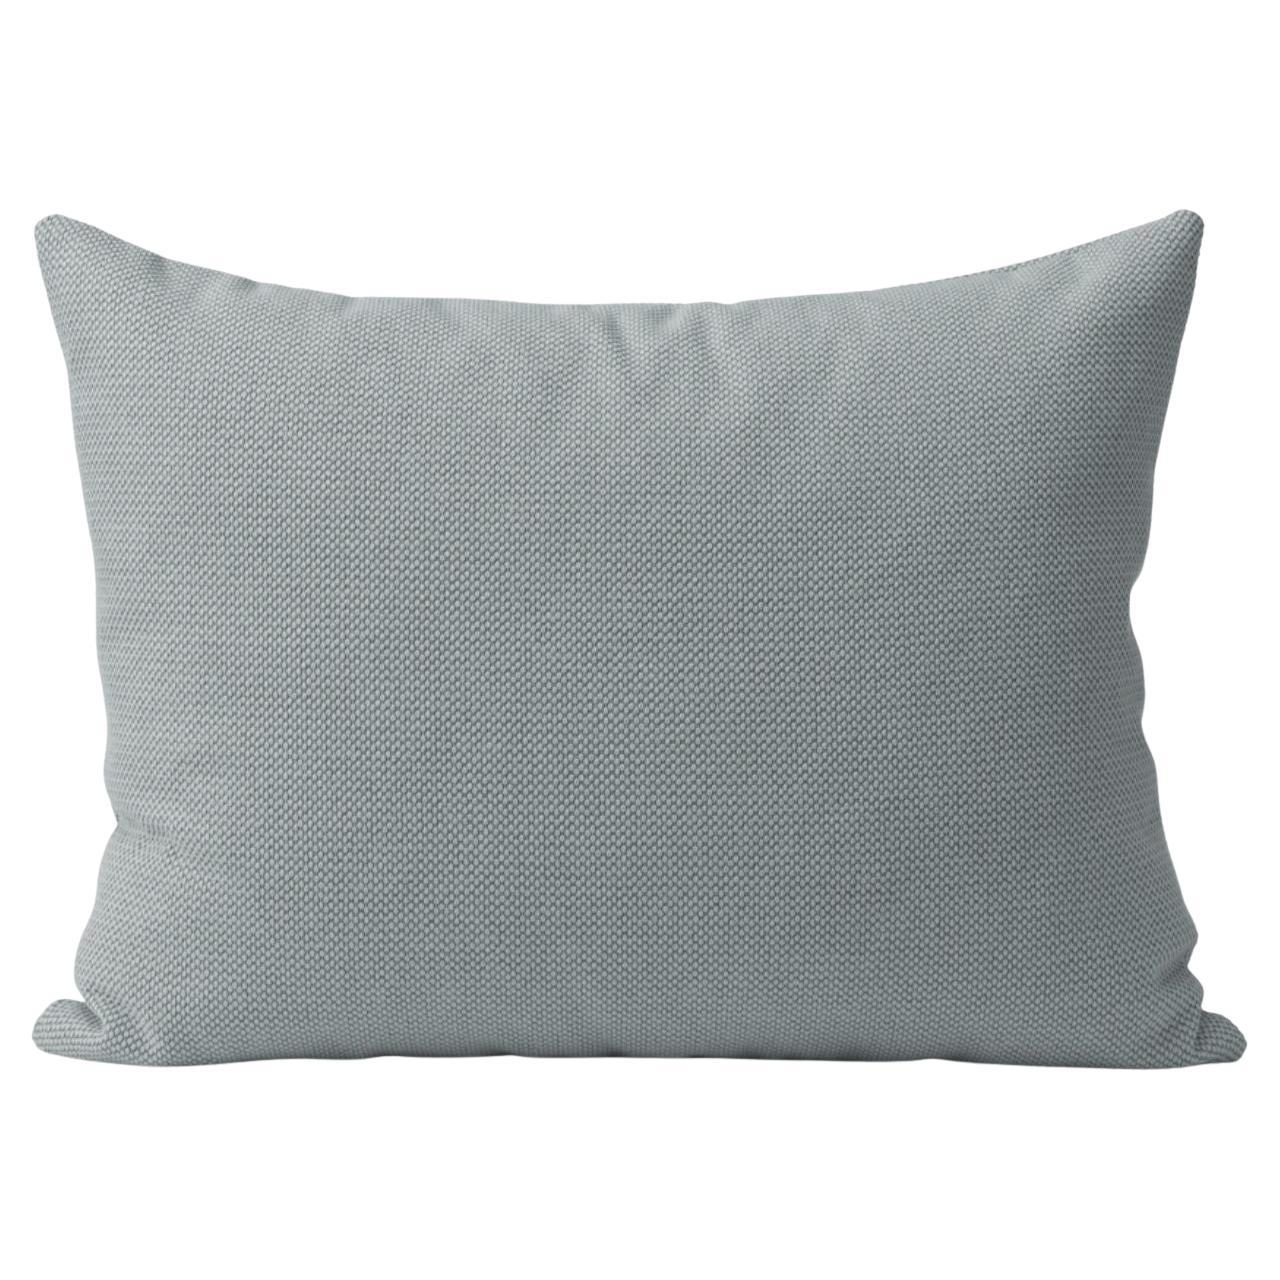 Galore Cushion Square Minty Grey by Warm Nordic For Sale